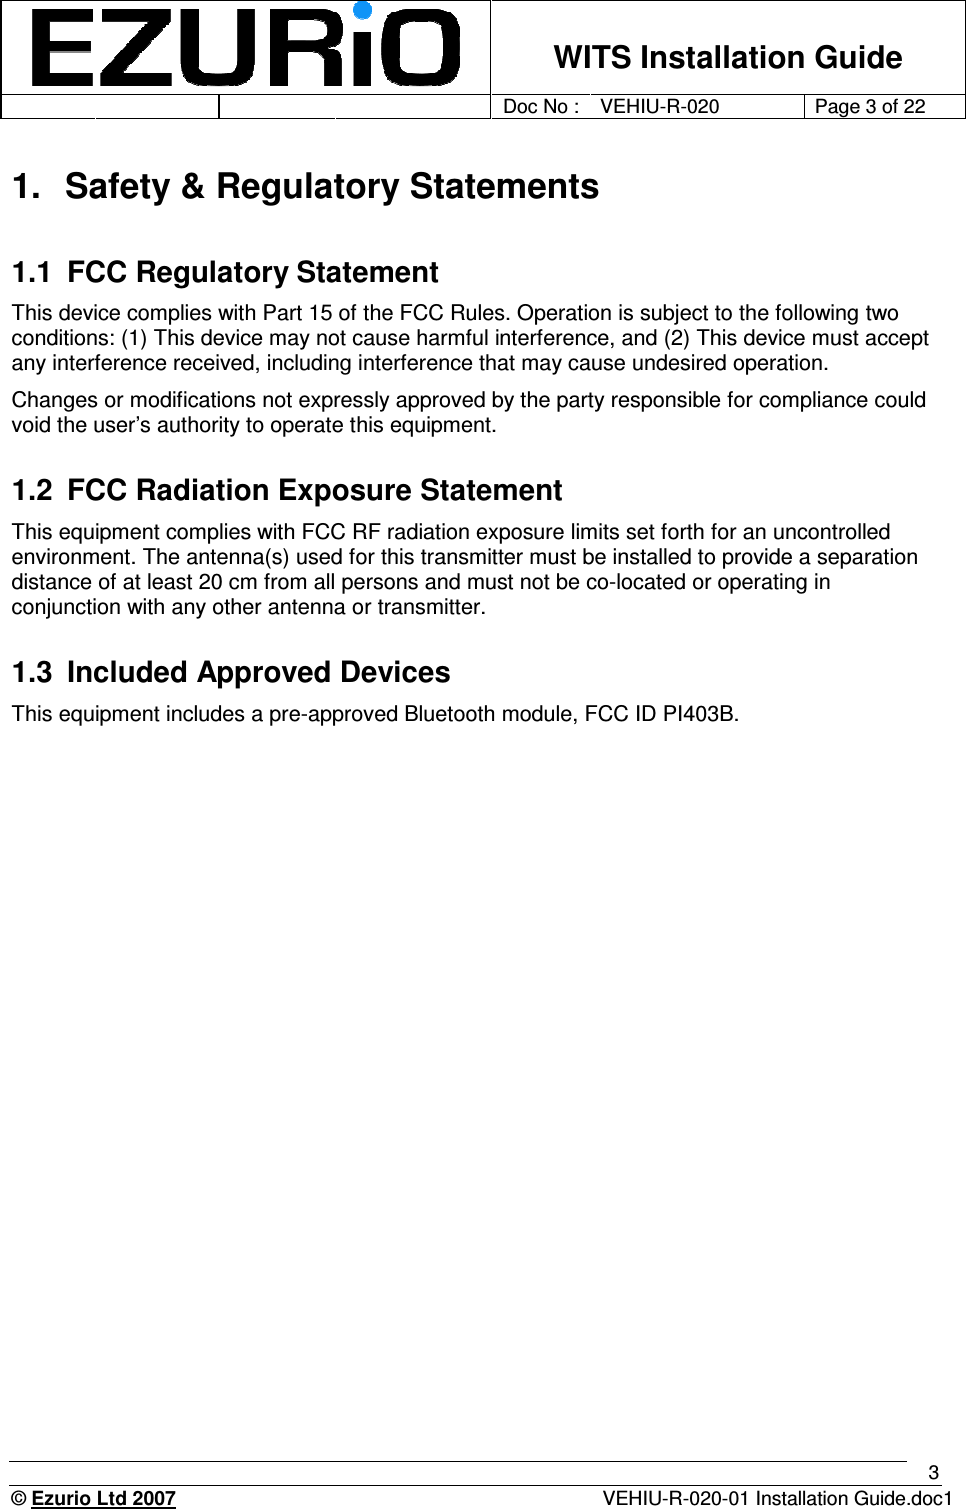    WITS Installation Guide         Doc No : VEHIU-R-020 Page 3 of 22      © Ezurio Ltd 2007  VEHIU-R-020-01 Installation Guide.doc1 3 1.  Safety &amp; Regulatory Statements  1.1  FCC Regulatory Statement This device complies with Part 15 of the FCC Rules. Operation is subject to the following two conditions: (1) This device may not cause harmful interference, and (2) This device must accept any interference received, including interference that may cause undesired operation. Changes or modifications not expressly approved by the party responsible for compliance could void the user’s authority to operate this equipment. 1.2  FCC Radiation Exposure Statement This equipment complies with FCC RF radiation exposure limits set forth for an uncontrolled environment. The antenna(s) used for this transmitter must be installed to provide a separation distance of at least 20 cm from all persons and must not be co-located or operating in conjunction with any other antenna or transmitter. 1.3  Included Approved Devices This equipment includes a pre-approved Bluetooth module, FCC ID PI403B. 